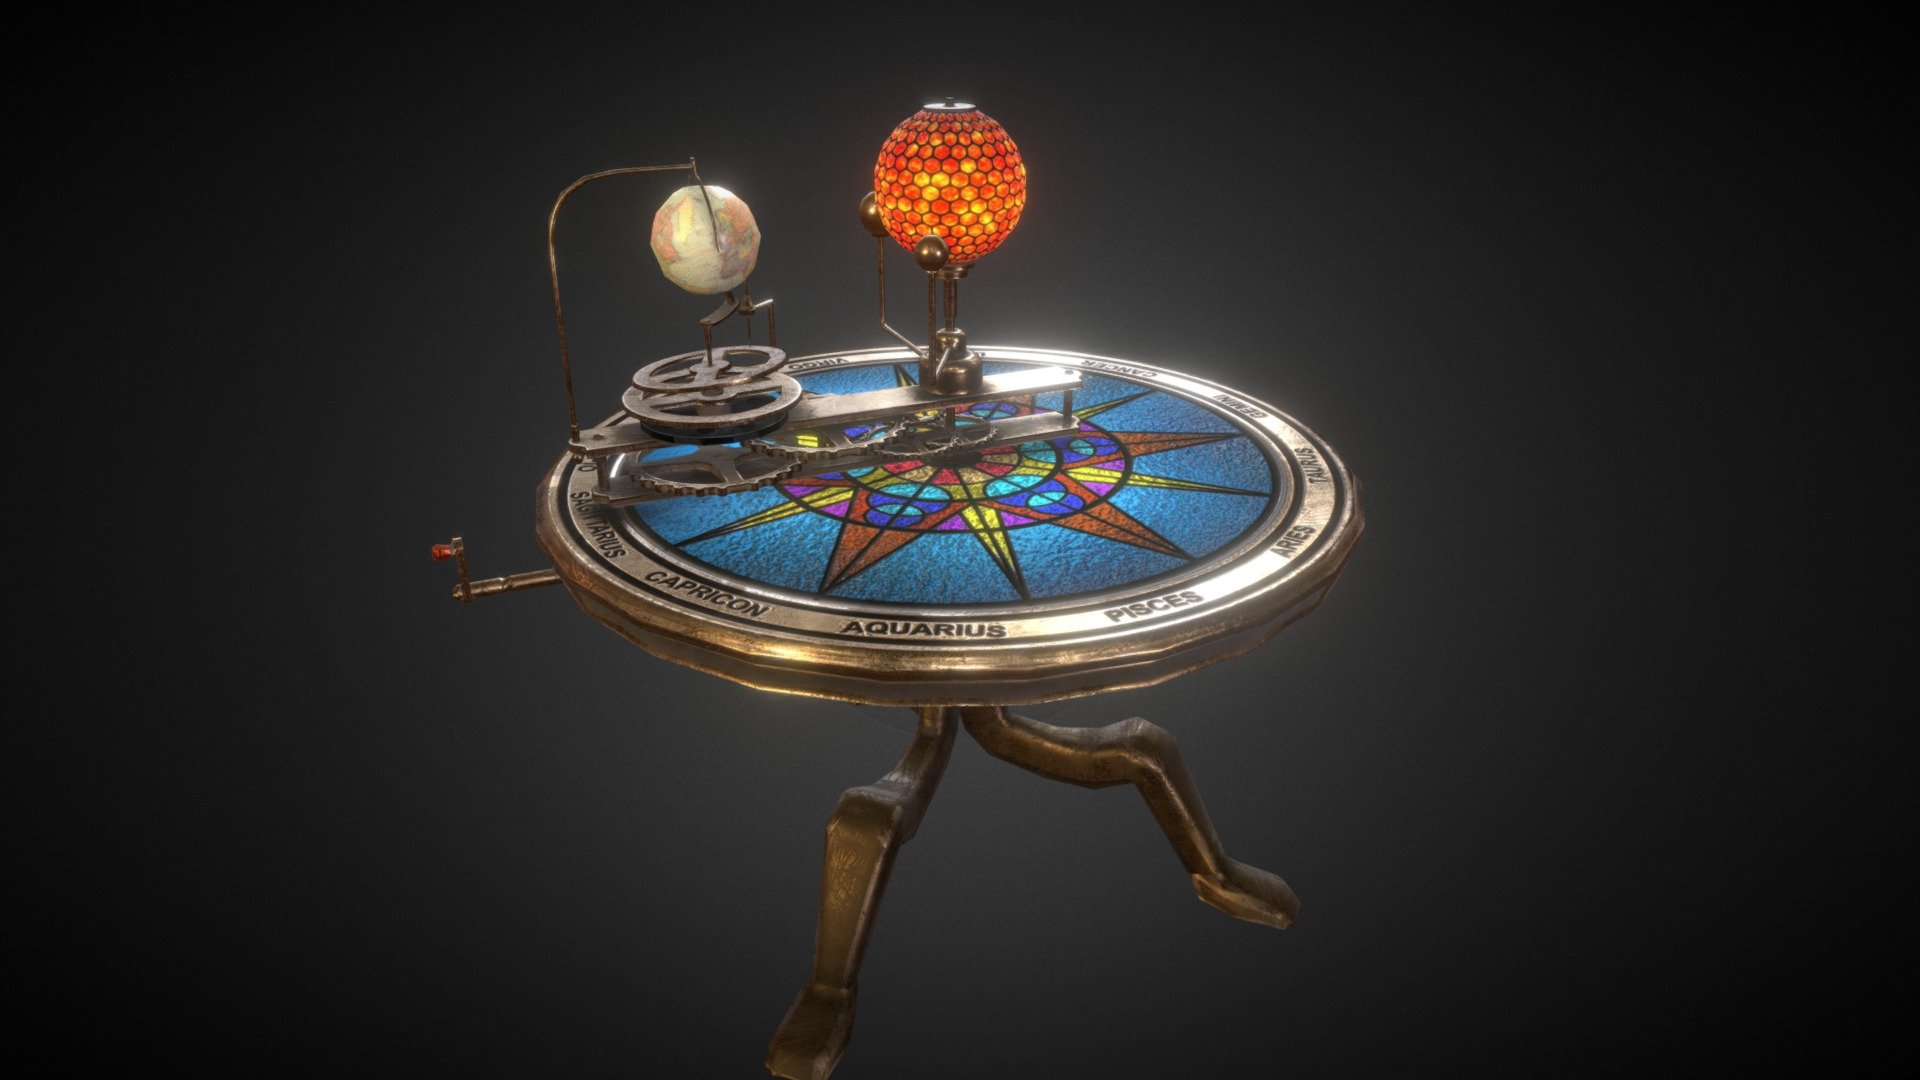 An antique orrery clock prop - game model. Was quite fun working on this project getting different materials to work together 3d model